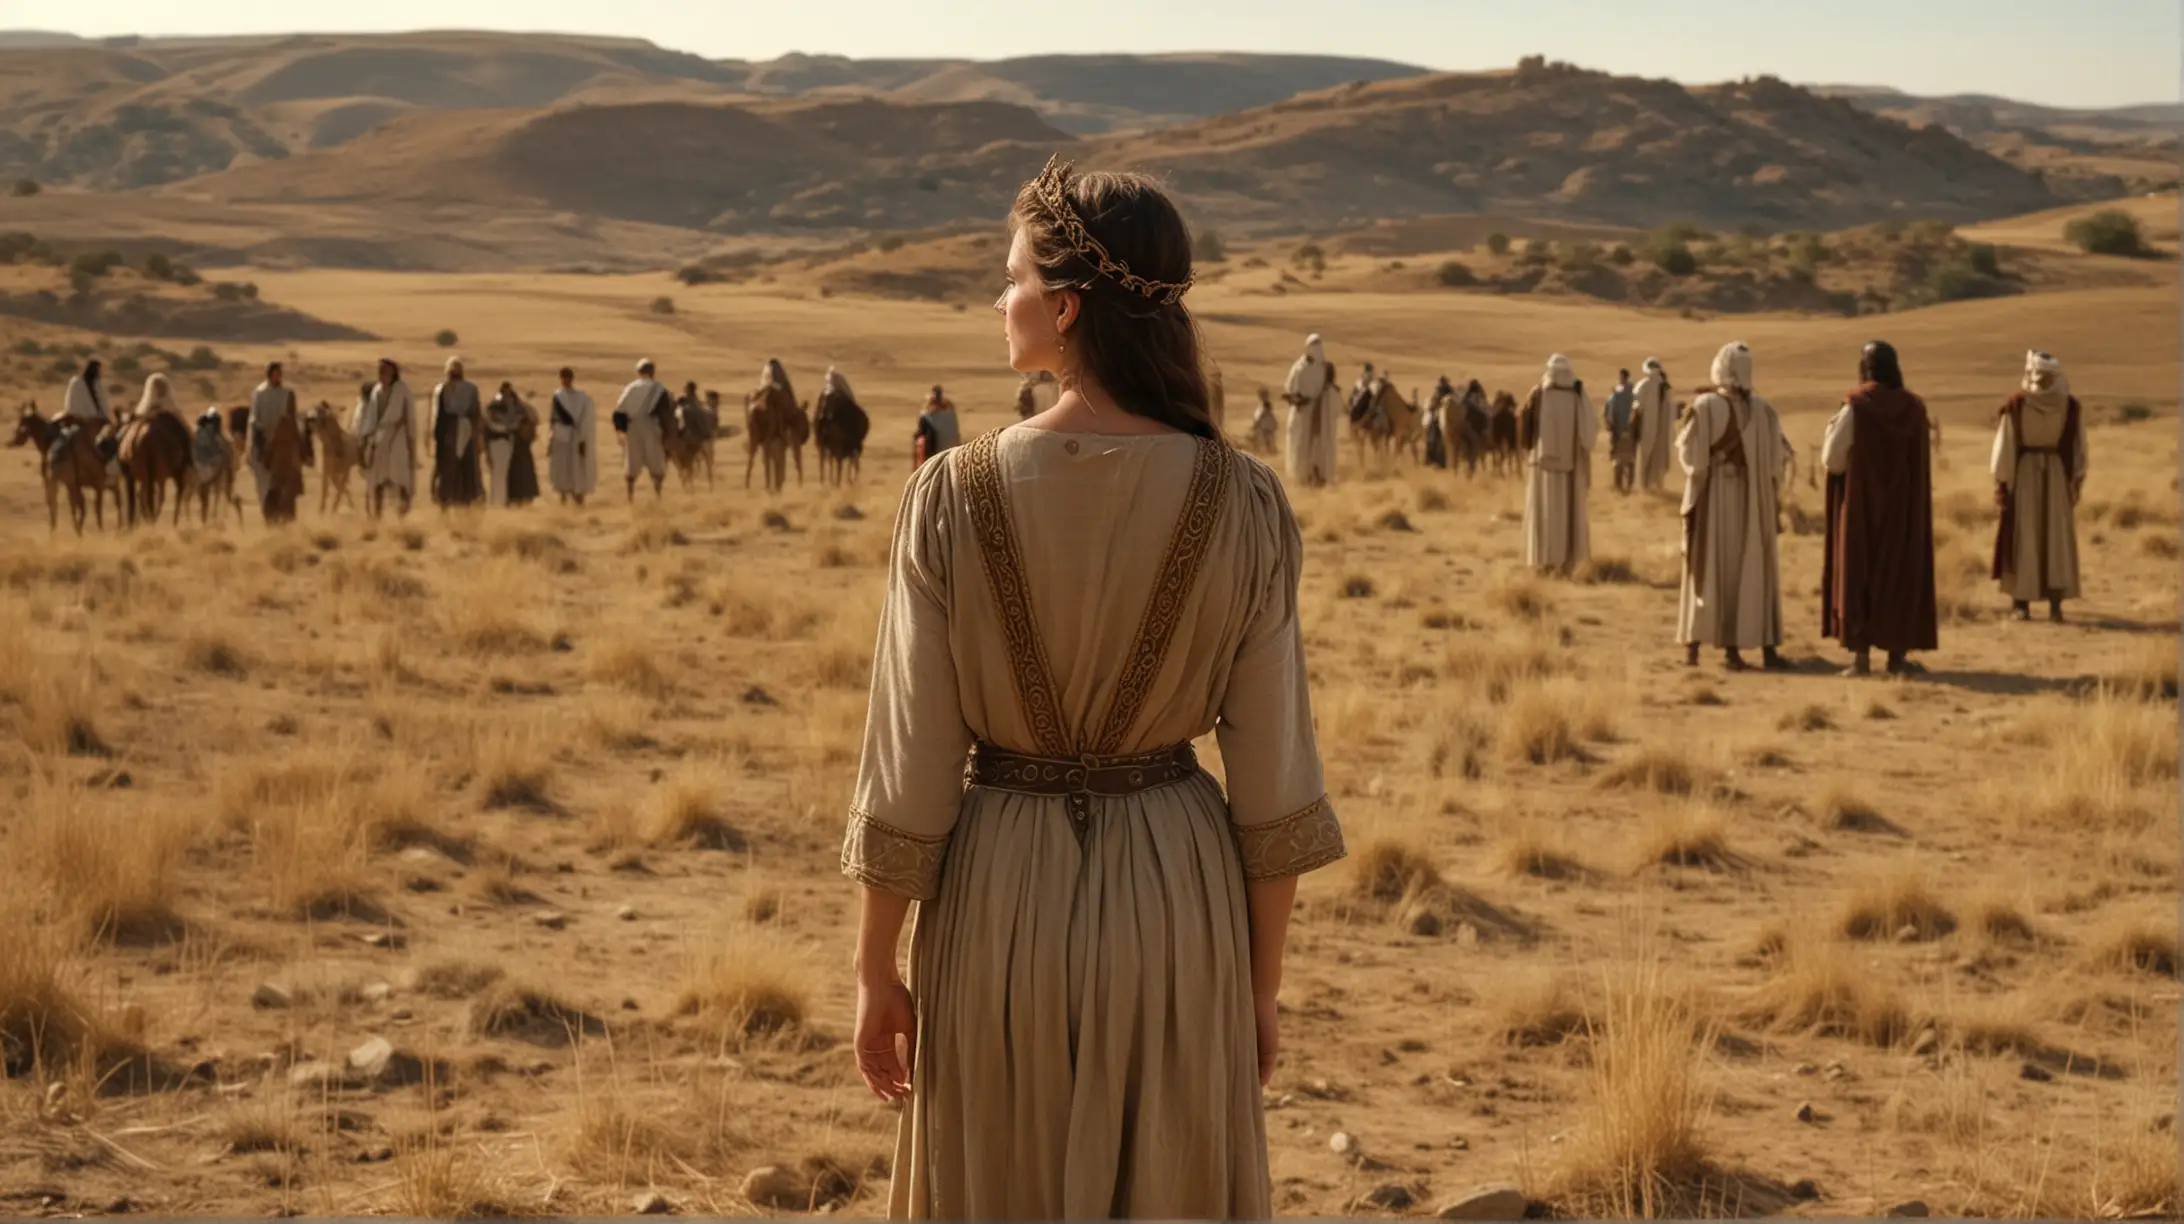 An attractive woman talking to a Young King David on a hilly desert field. There are some  other men standing in the field  in the  background.  Set during the Biblical Era of King David